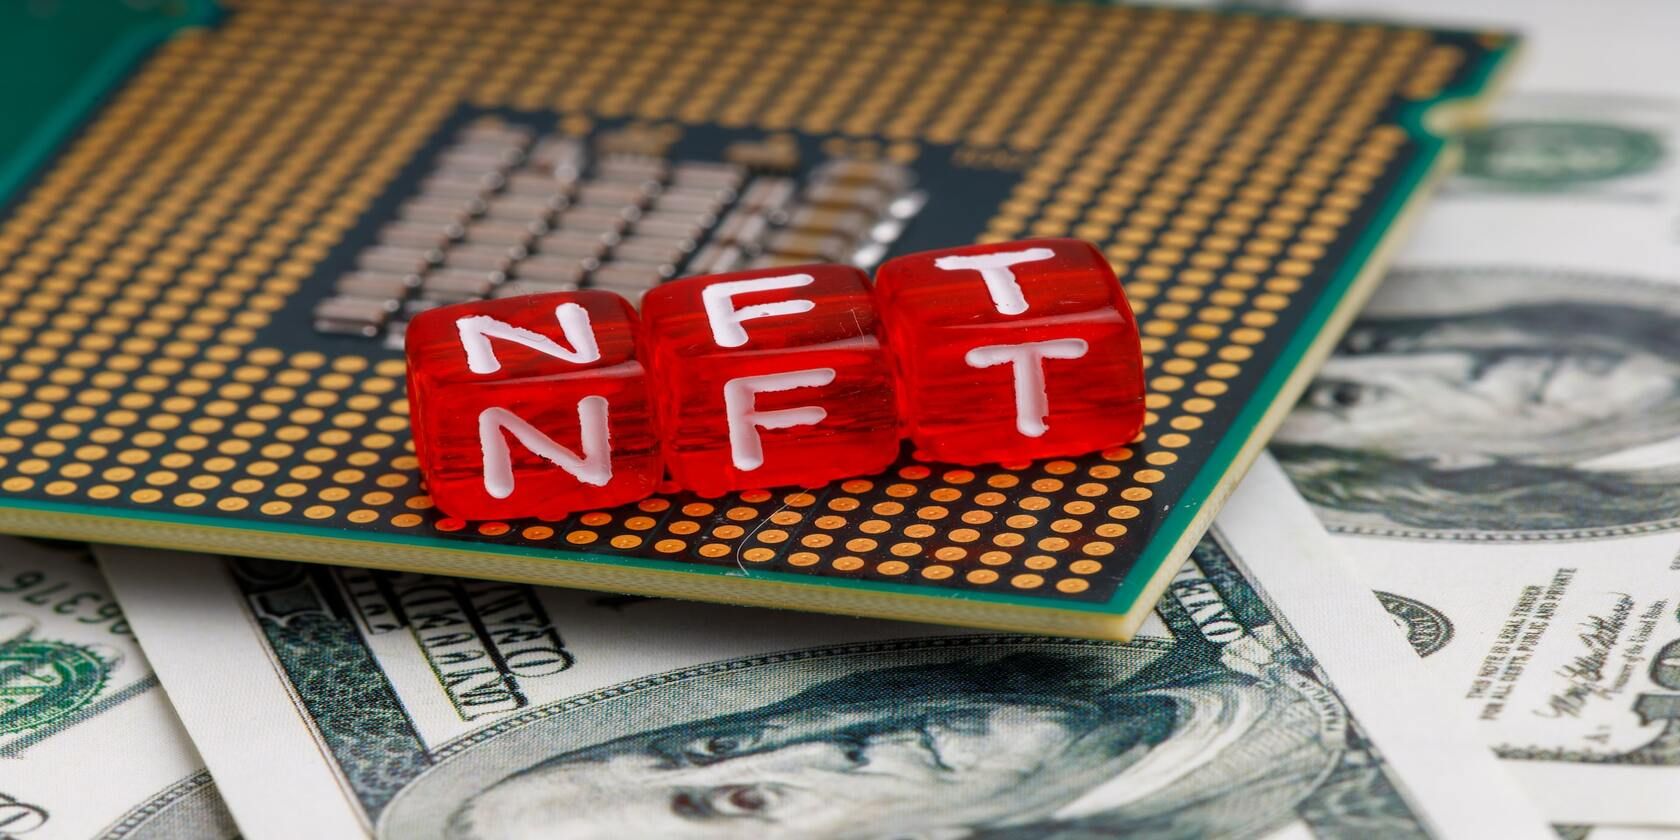 NFT inscription on cubes against the background of dollars